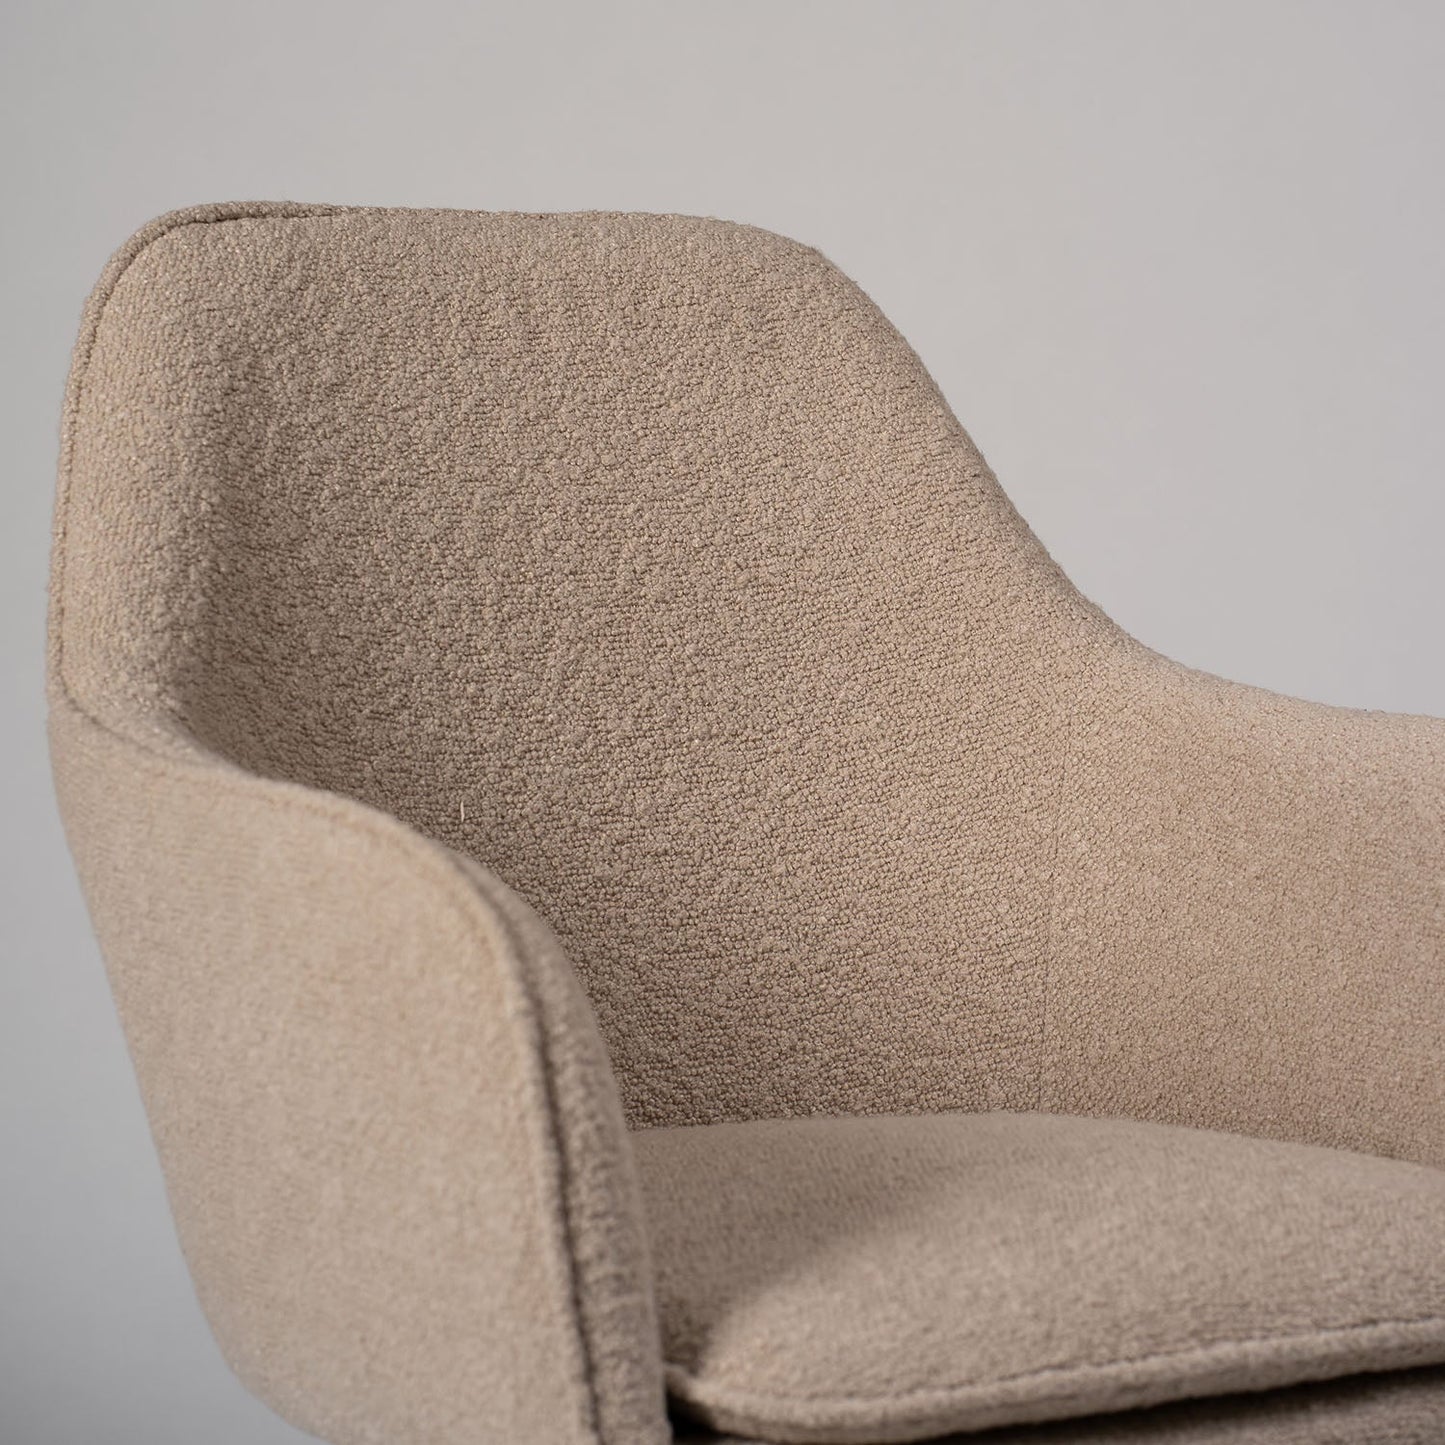 Dolly accent chair - boucle with black legs - Laura James